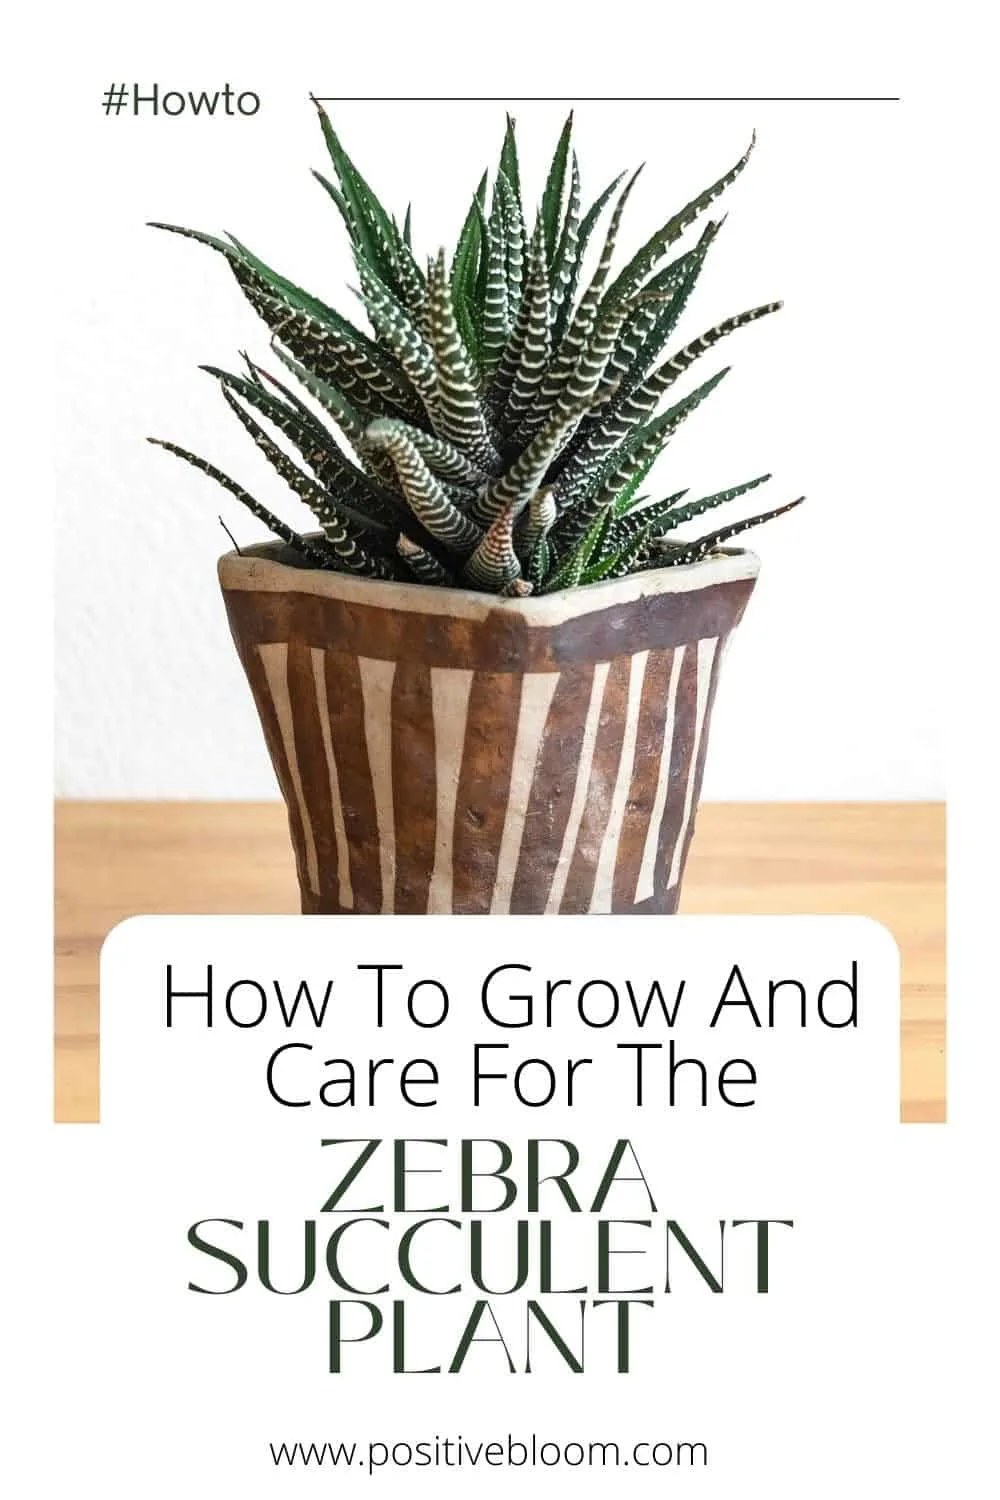 How To Grow And Care For The Zebra Succulent Plant Pinterest